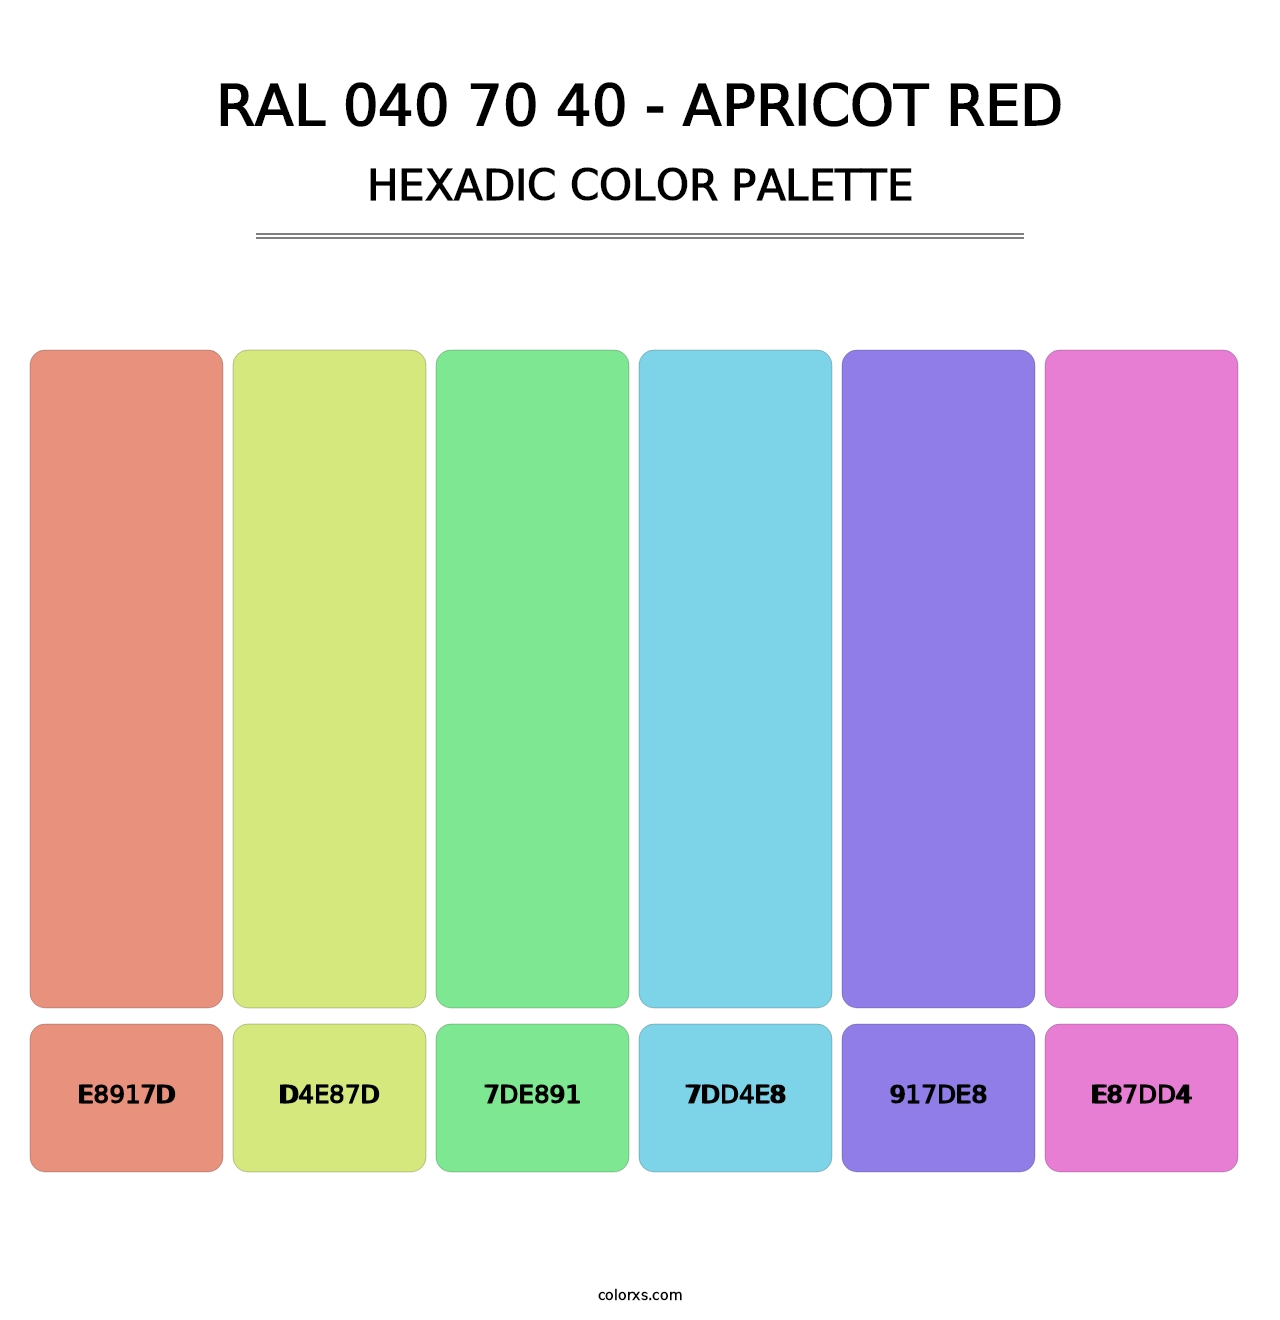 RAL 040 70 40 - Apricot Red - Hexadic Color Palette